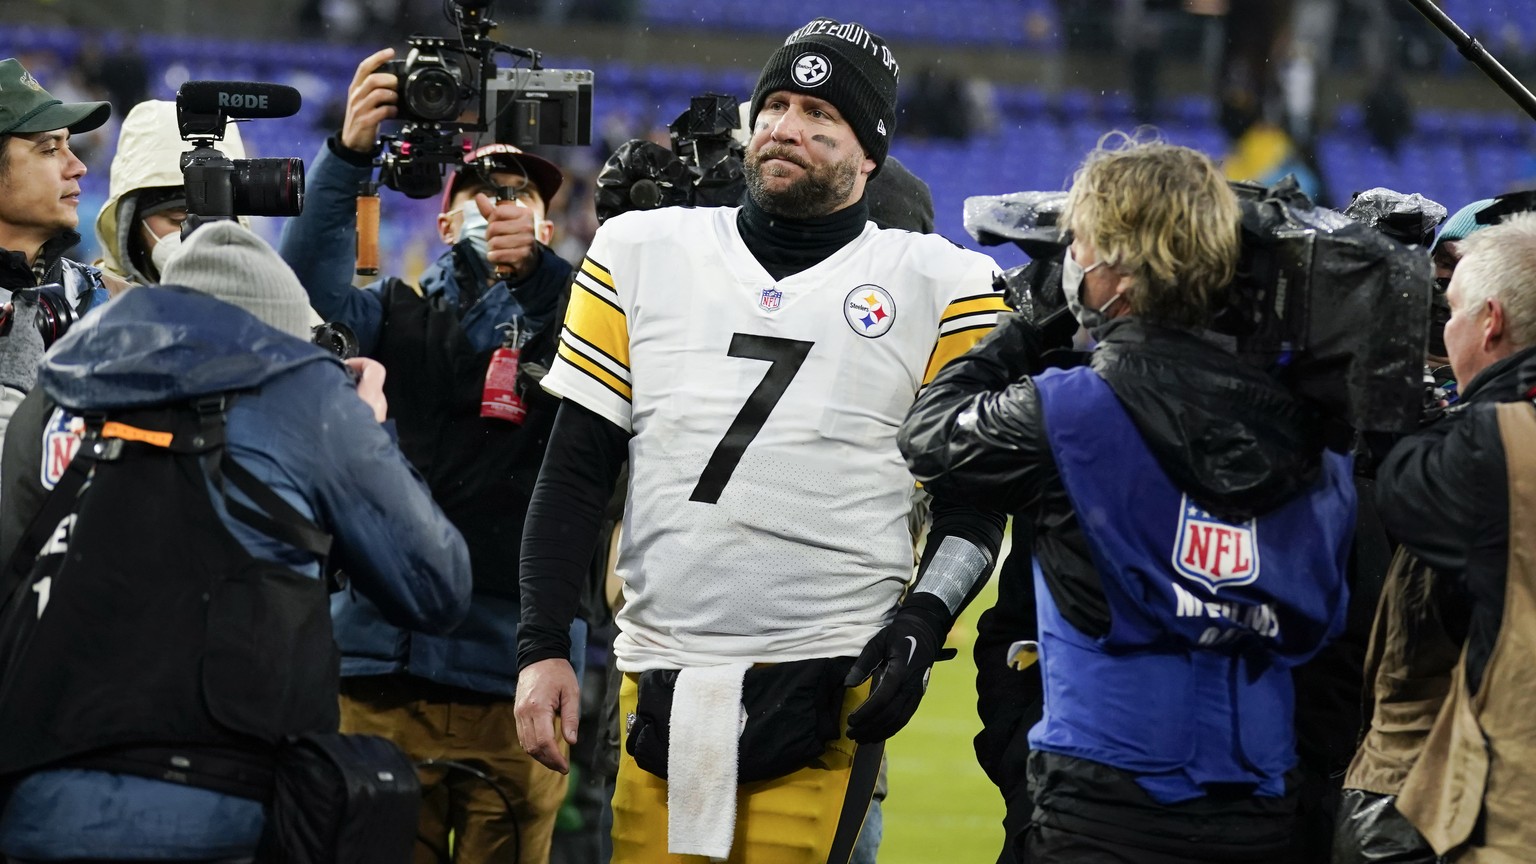 Pittsburgh Steelers quarterback Ben Roethlisberger (7) walks off the field after an NFL football game against the Baltimore Ravens, Sunday, Jan. 9, 2022, in Baltimore. The Steelers won 16-13. (AP Phot ...